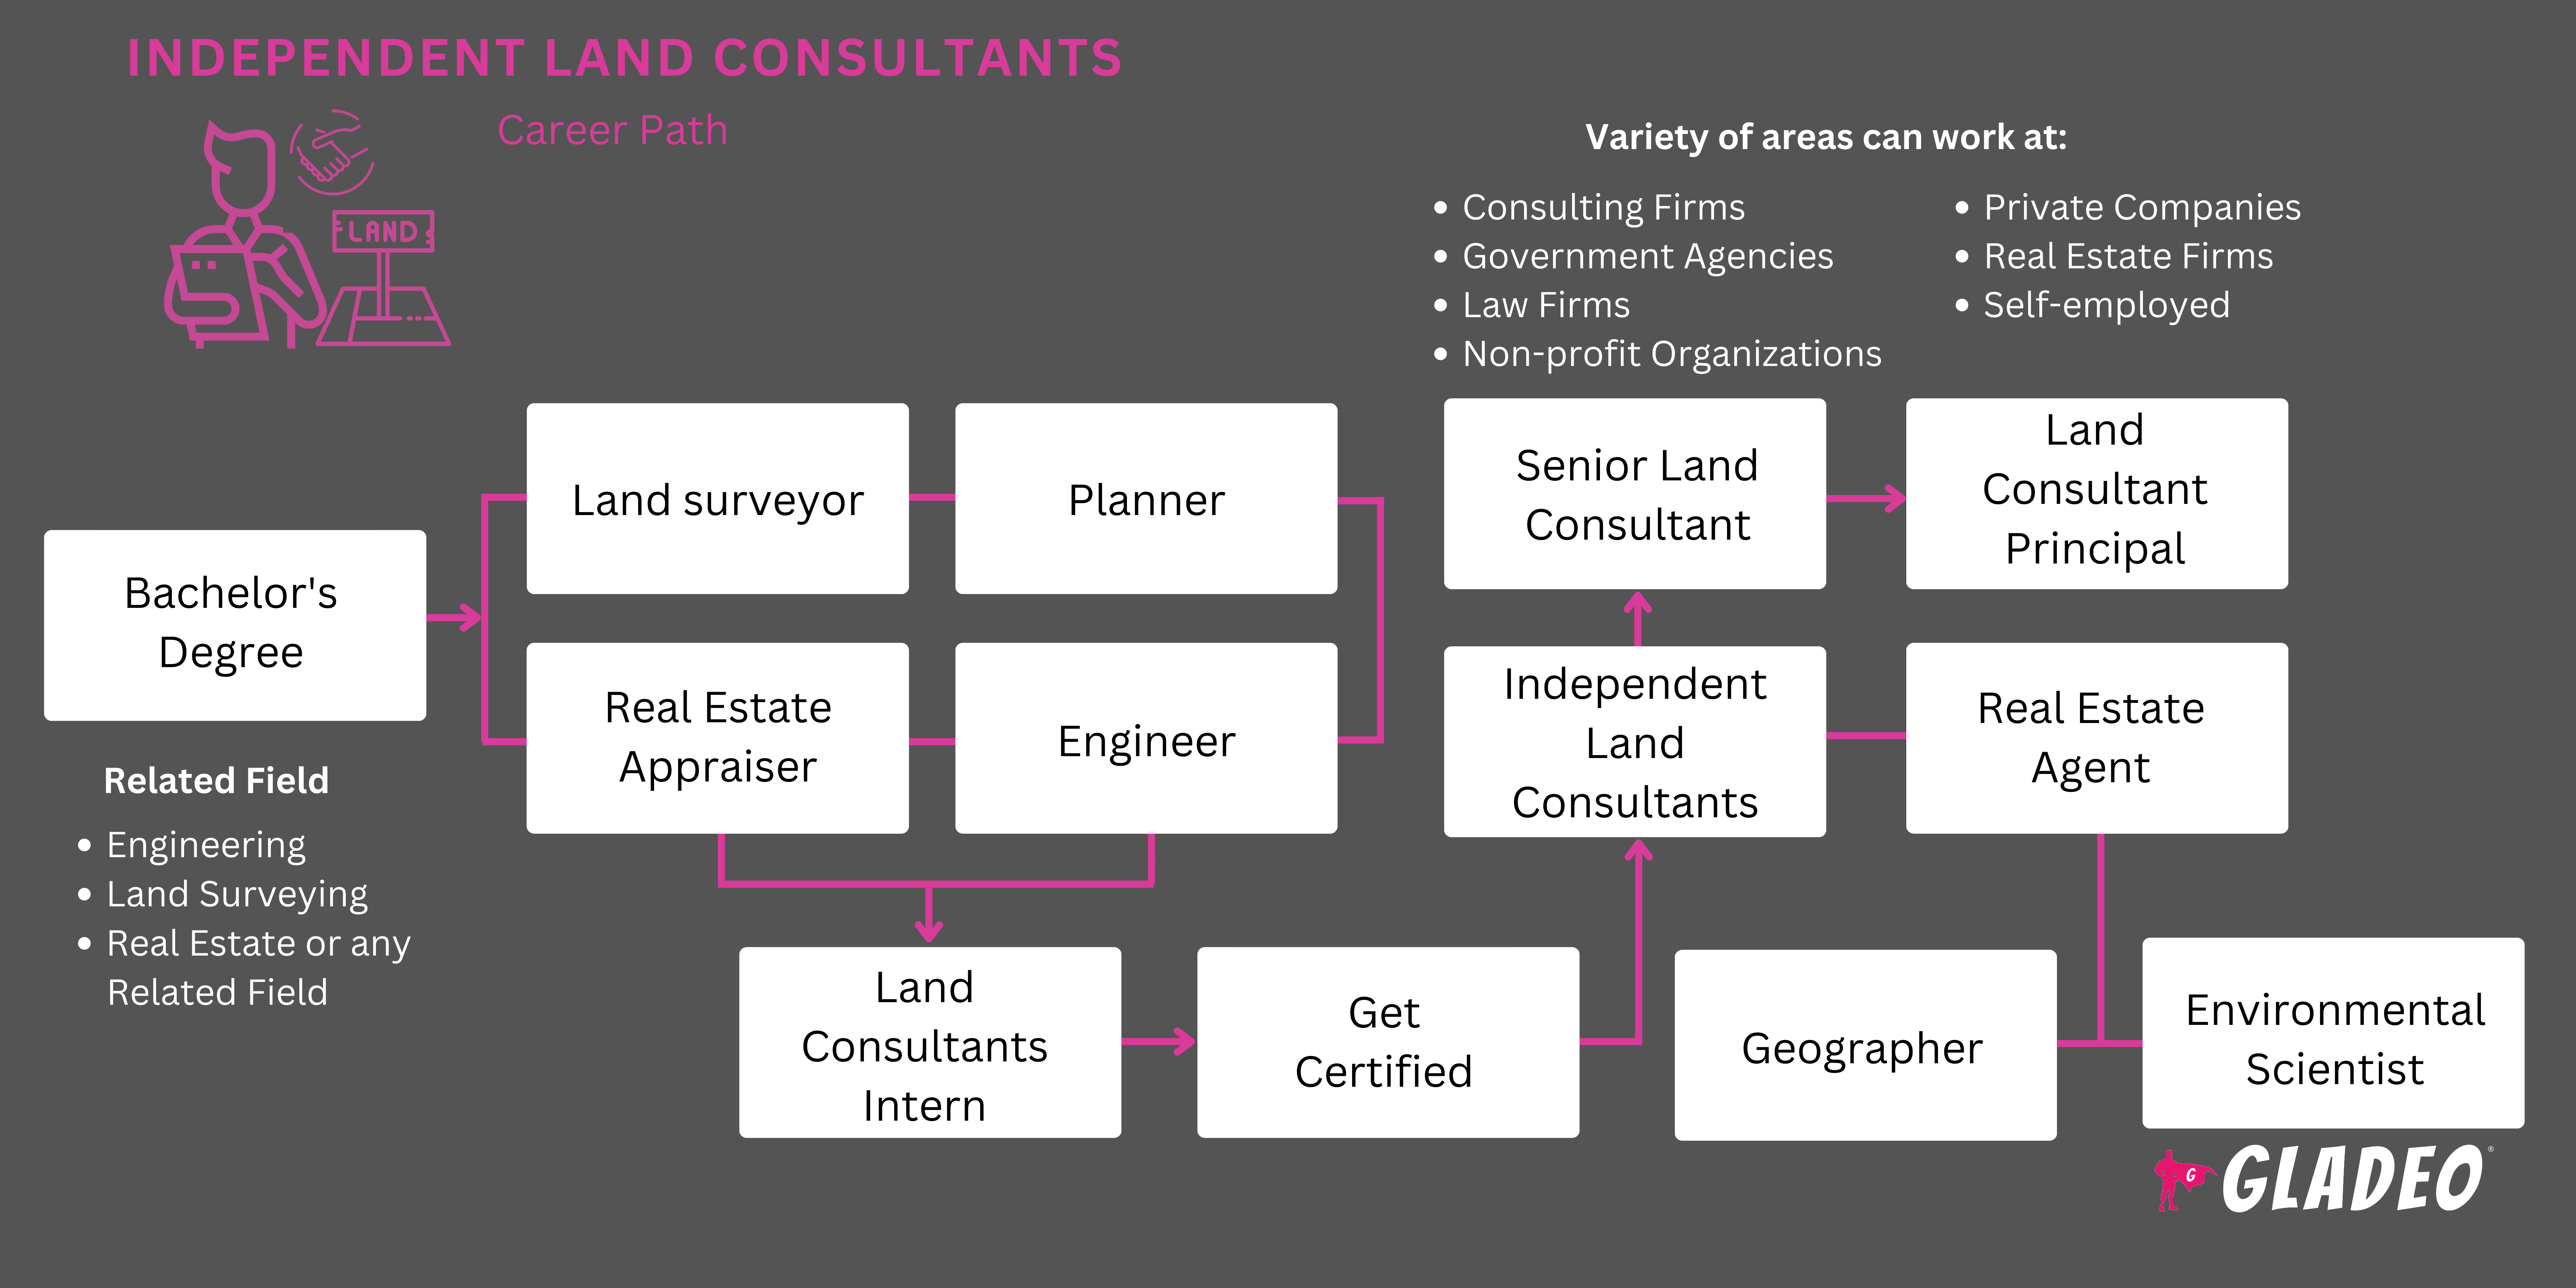 Independent Land Consultants